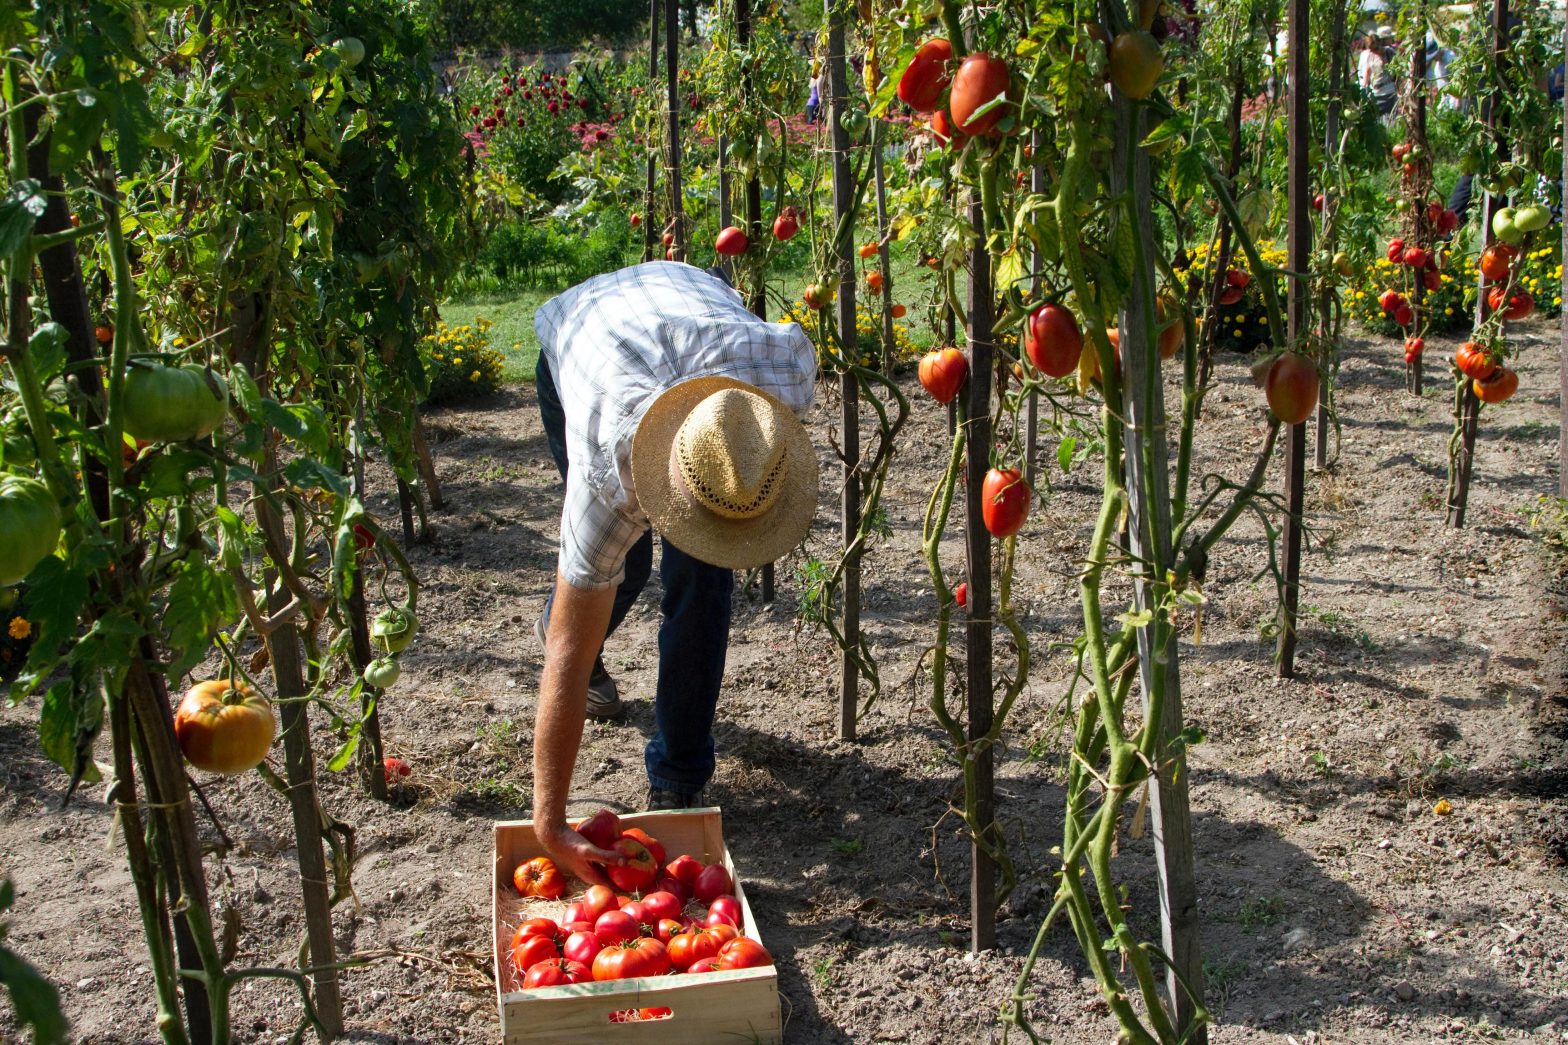 Practing permaculture design - a person picks tomatoes between rows of plants